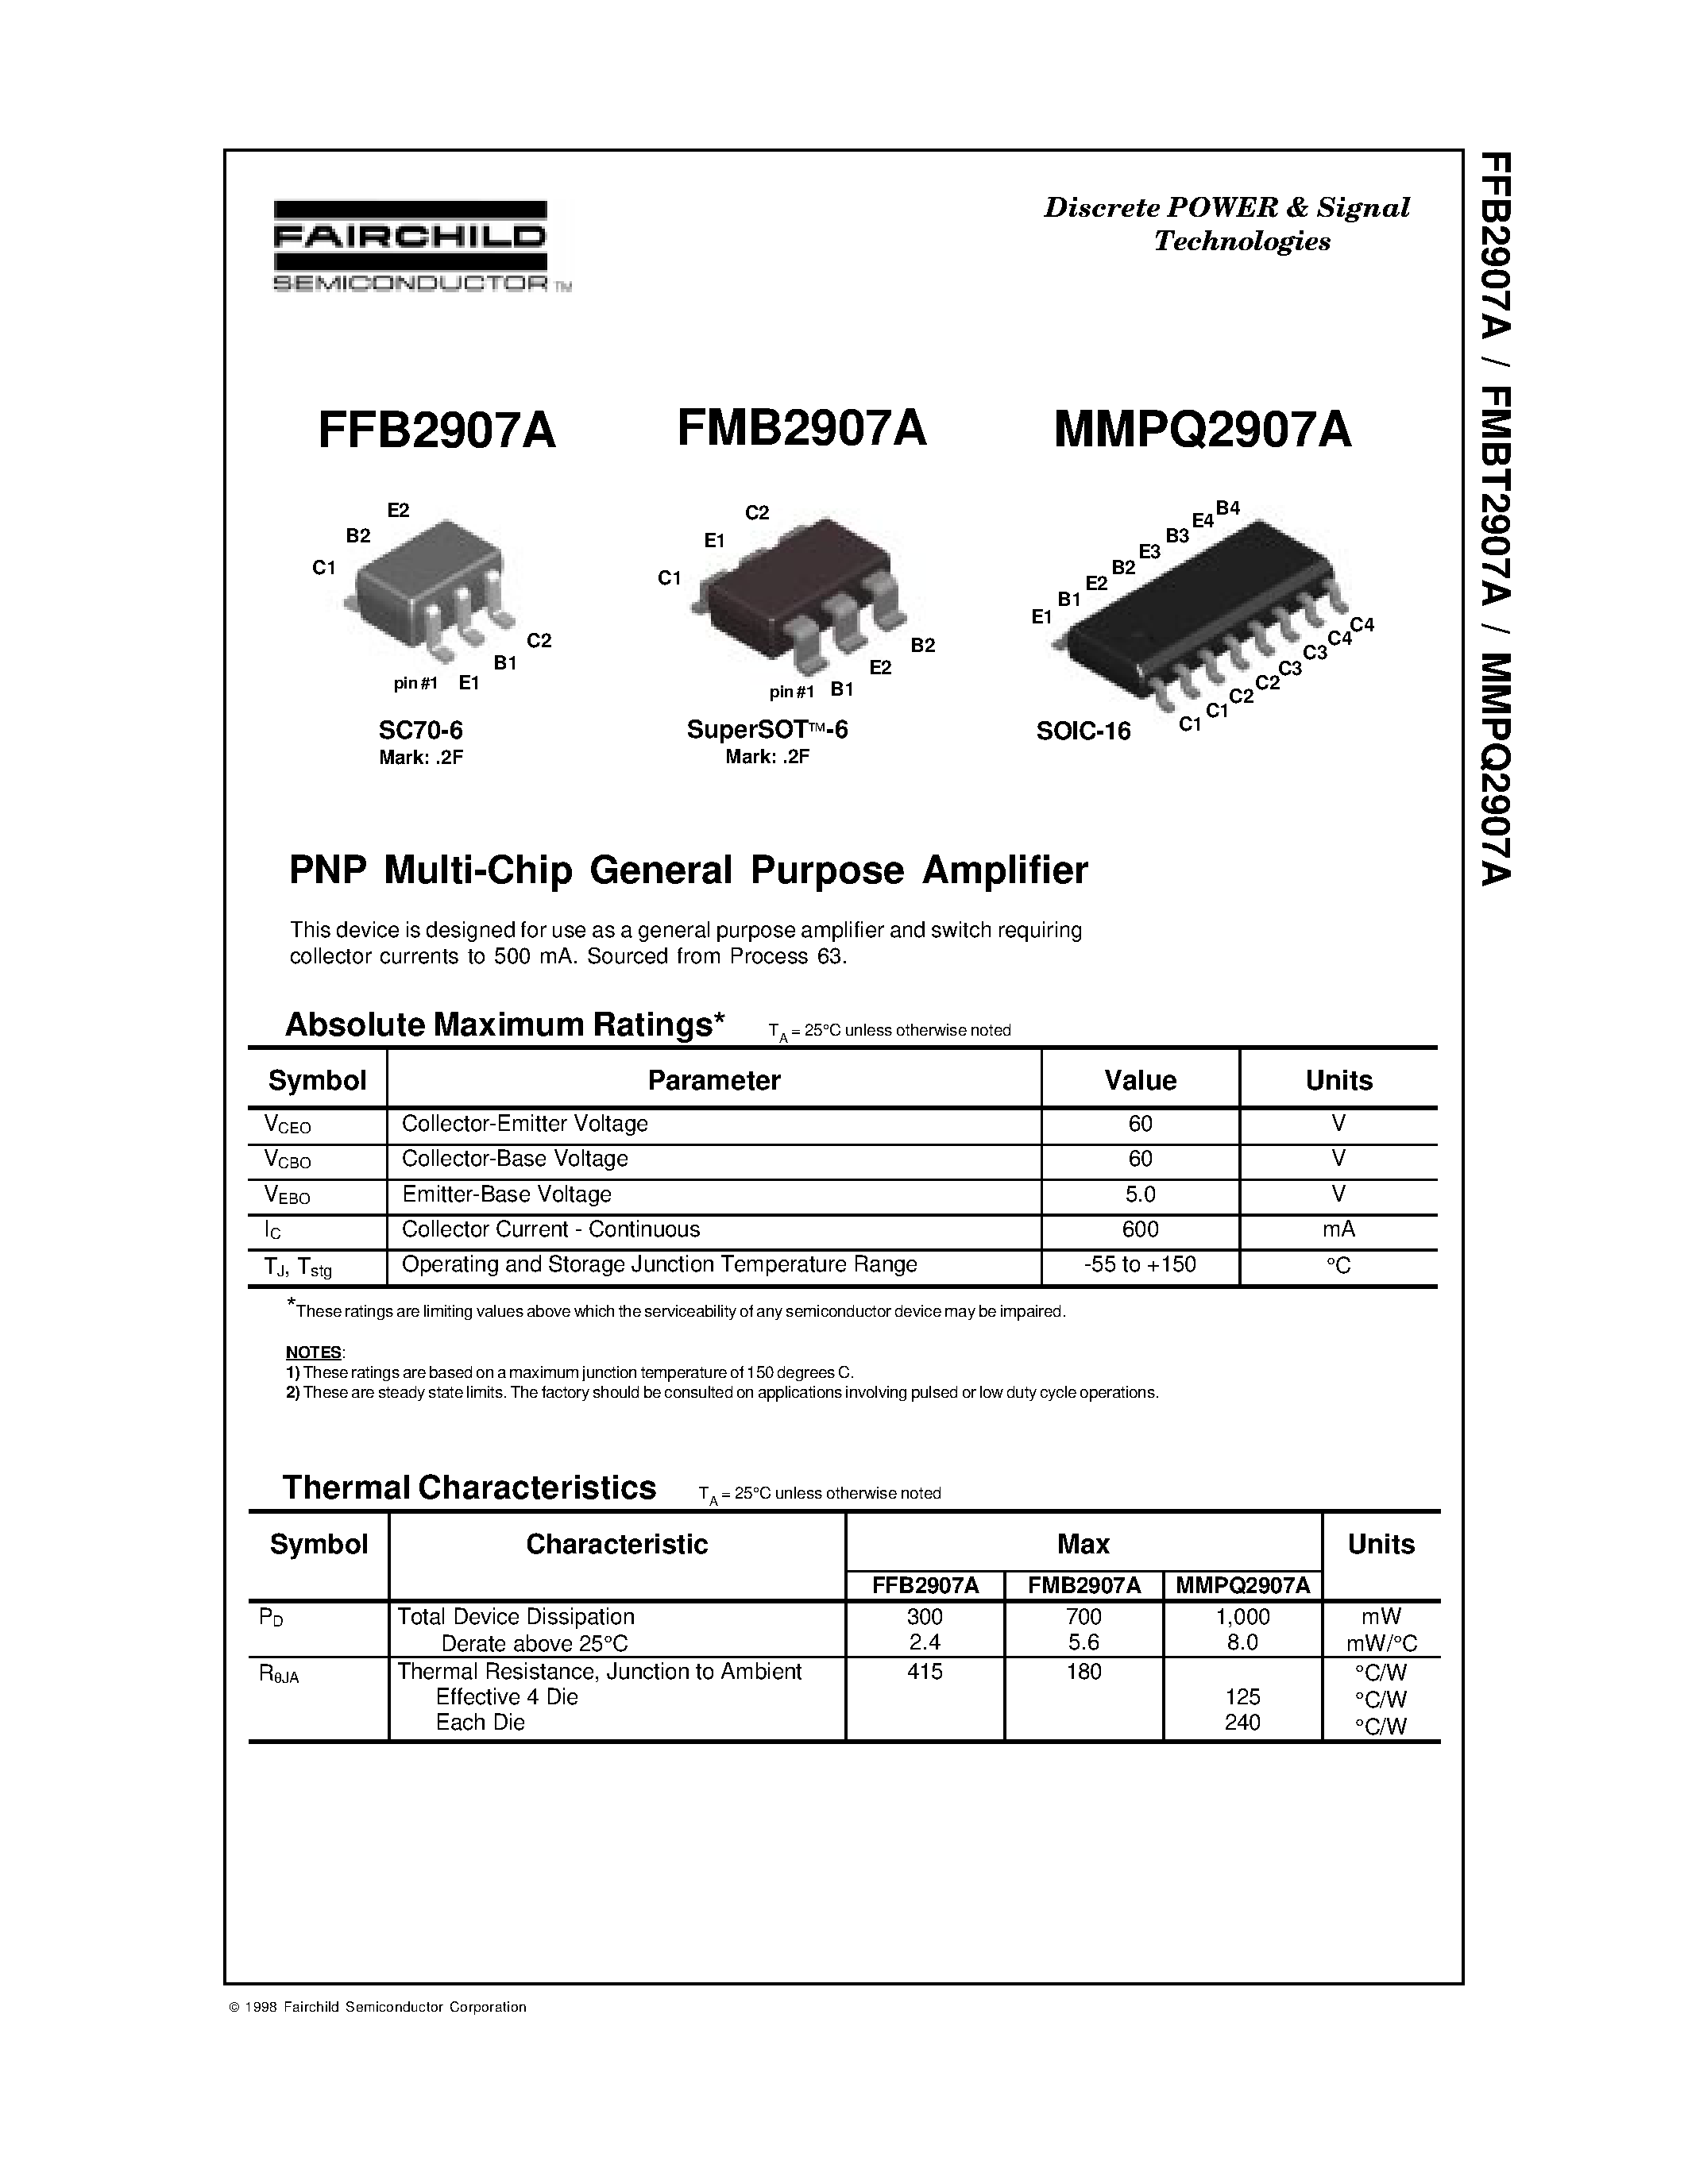 Datasheet FMB2907A - PNP Multi-Chip General Purpose Amplifier page 1